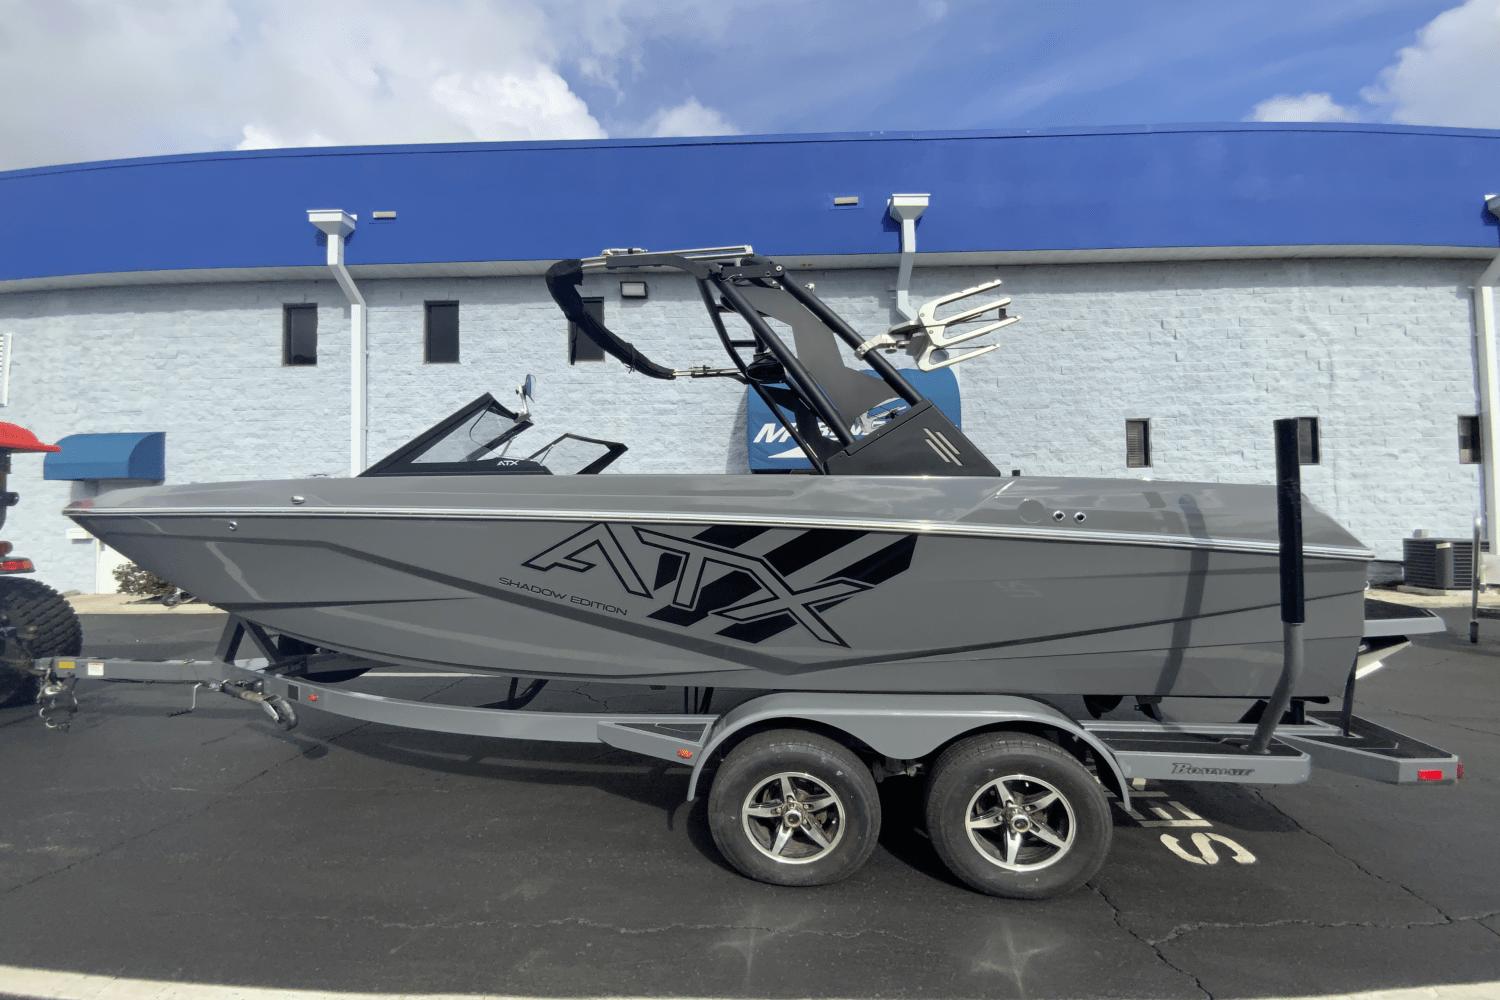 2021 ATX Surf Boats 20 Type-S Ski and Wakeboard for sale - YachtWorld